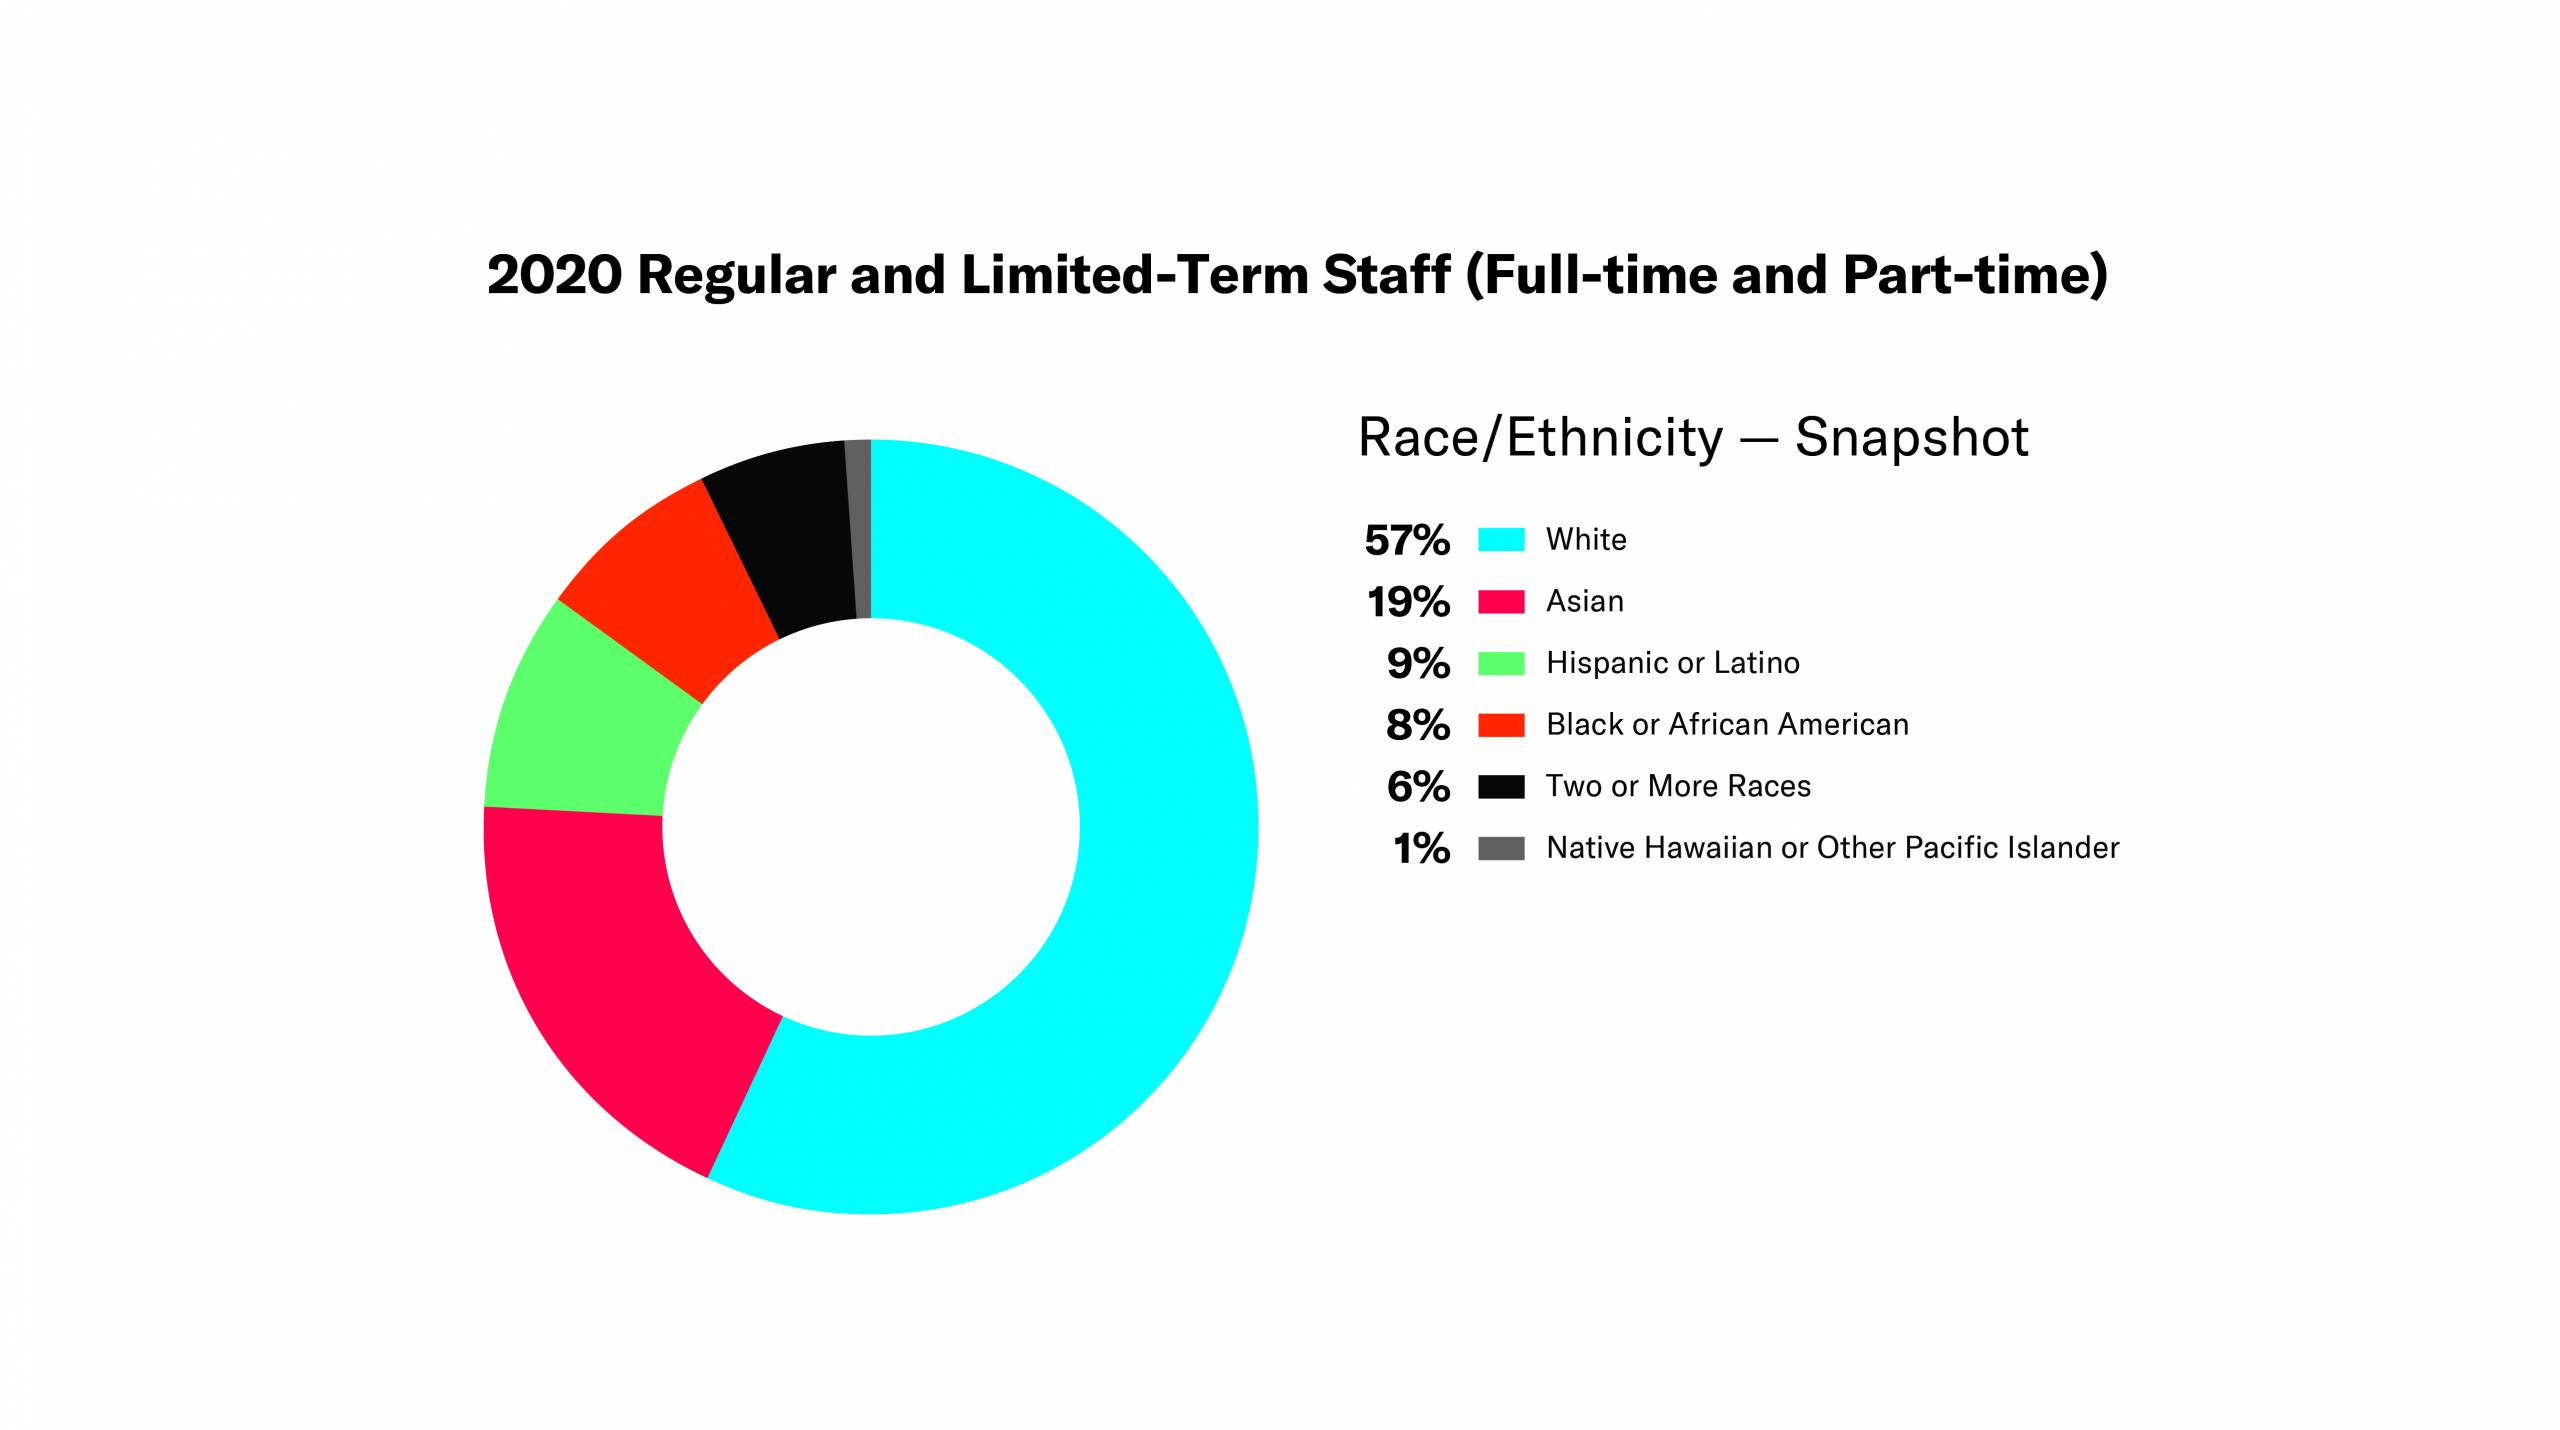 Donut chart - 2020 Regular and Limited-Term Staff (Full-time and Part-time) - Race/Ethnicity Snapshot